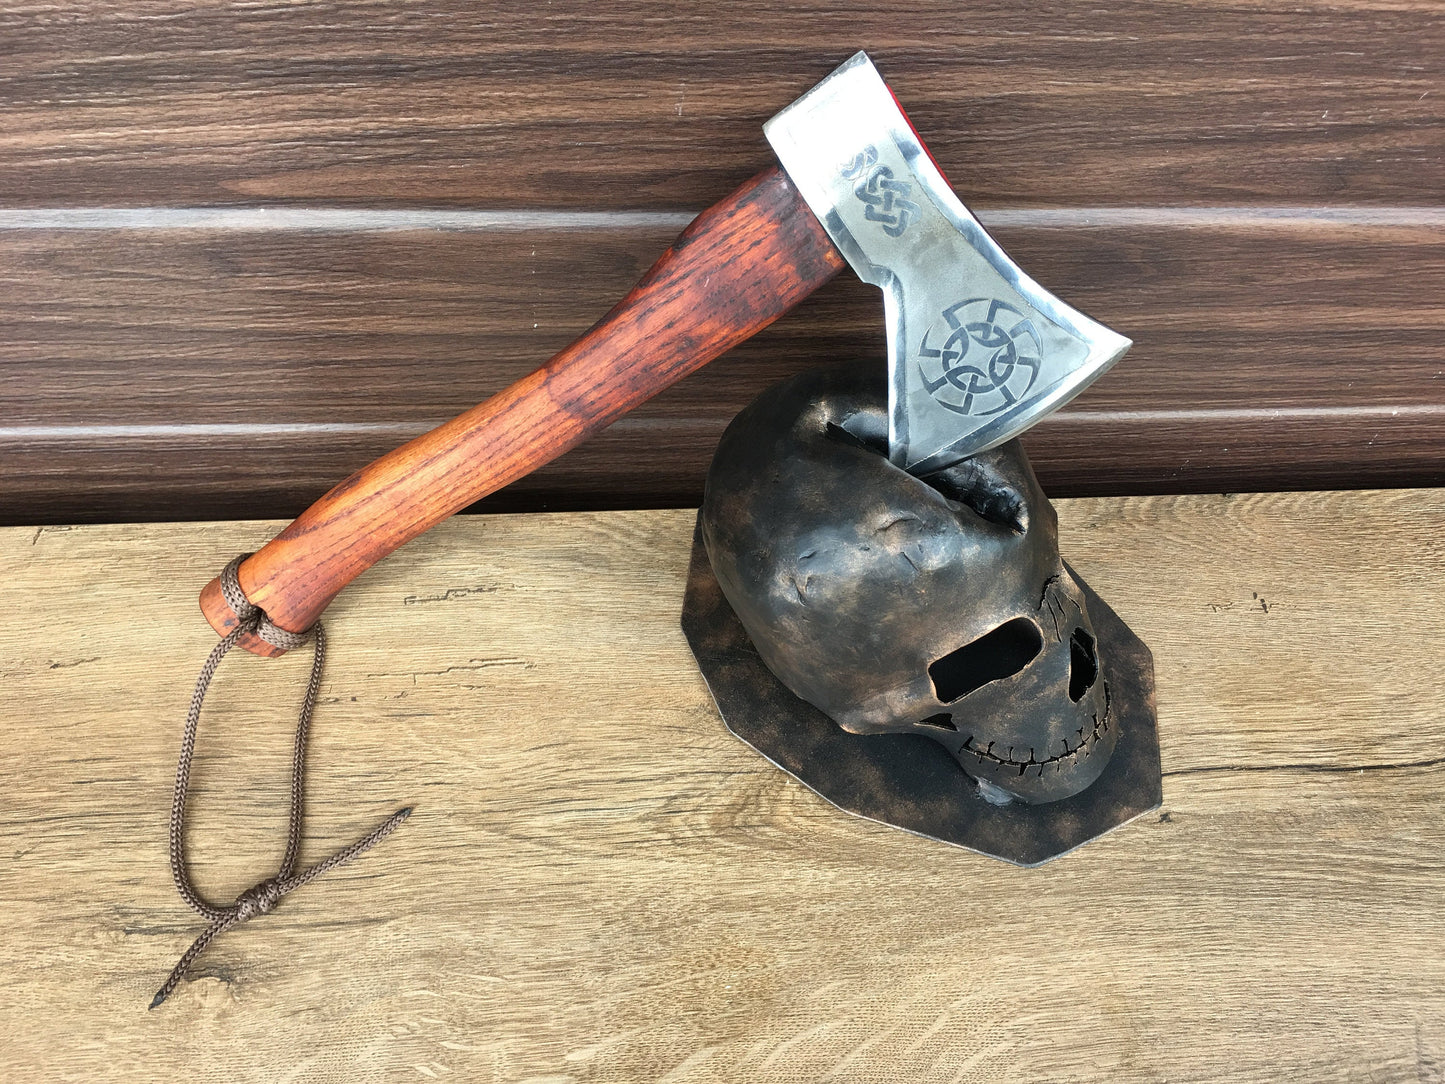 Axe holder with axe, axe stand, viking axe, Halloween gift, mens gifts, metal skull,manly gifts,medieval,tomahawk,gift for him,gifts for men